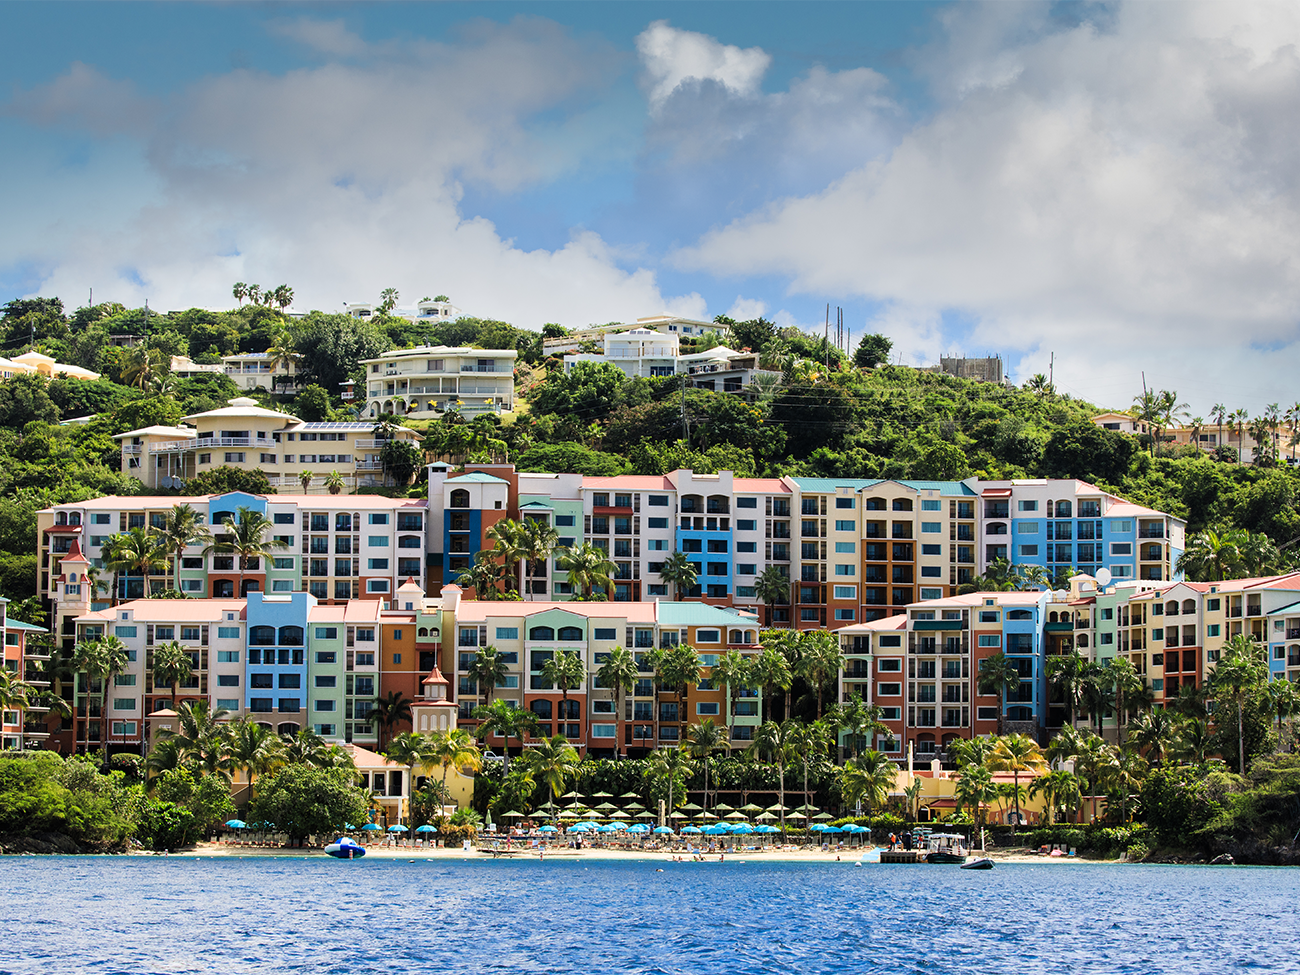 Image of Marriott's Frenchman's Cove in St. Thomas.